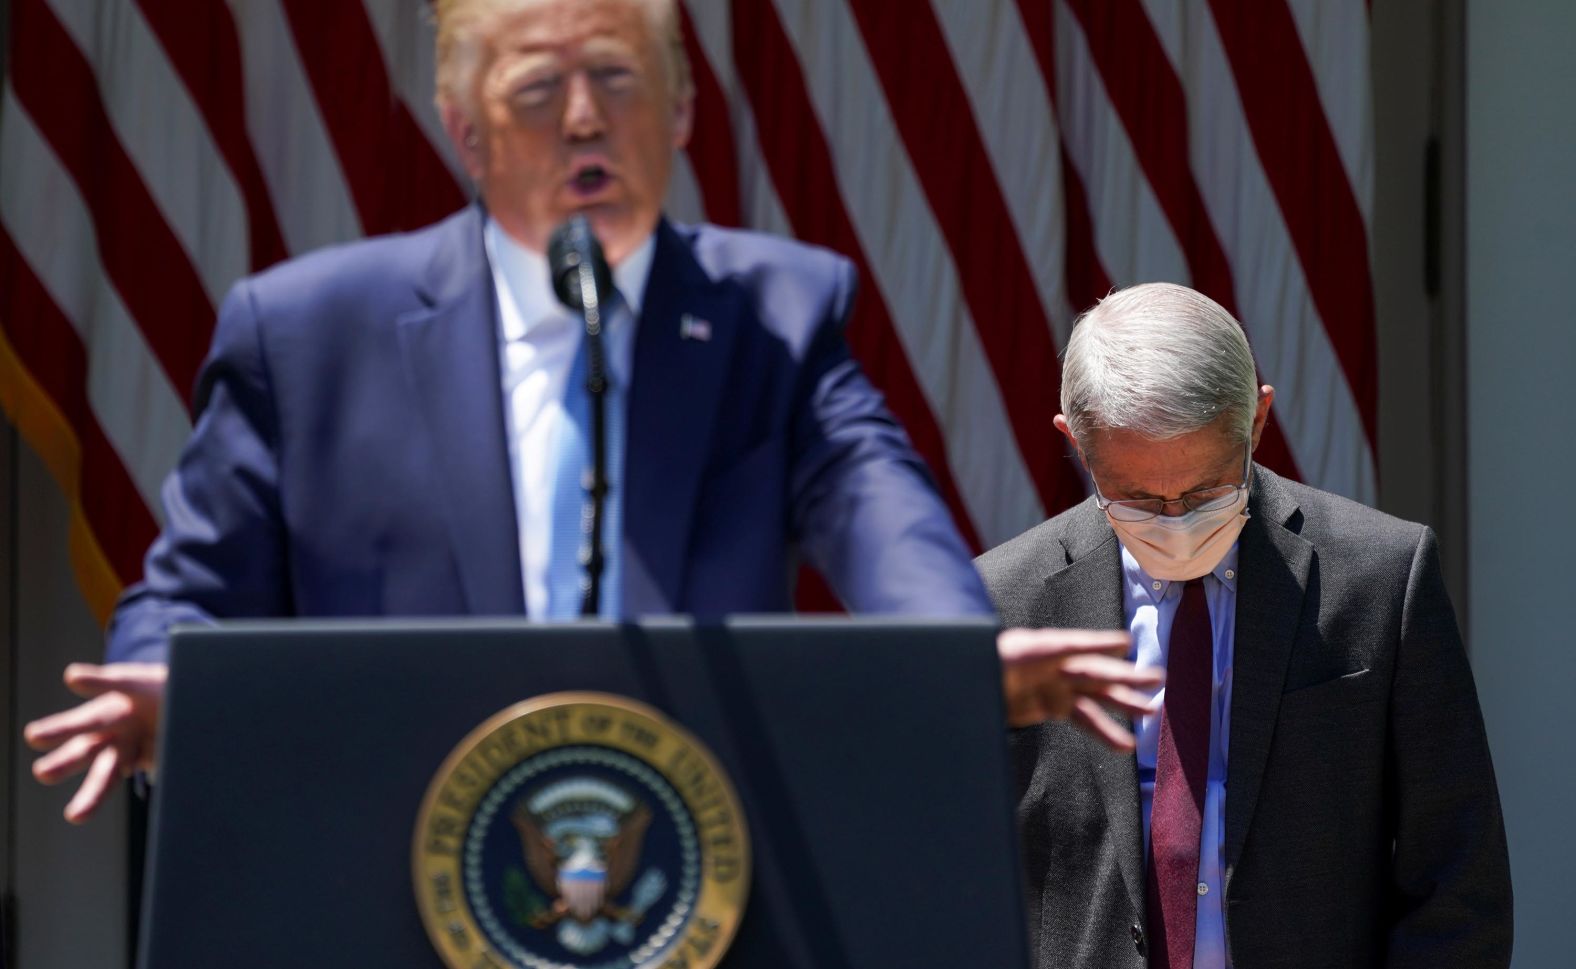 Dr. Anthony Fauci, director of the National Institute of Allergy and Infectious Diseases, looks down as Trump speaks in the White House Rose Garden in May 2020. Trump was unveiling <a href="index.php?page=&url=https%3A%2F%2Fwww.cnn.com%2F2020%2F05%2F15%2Fpolitics%2Ftrump-vaccine-effort-coronavirus%2Findex.html" target="_blank">Operation Warp Speed,</a> a program aimed at developing a coronavirus vaccine by the end of the year.